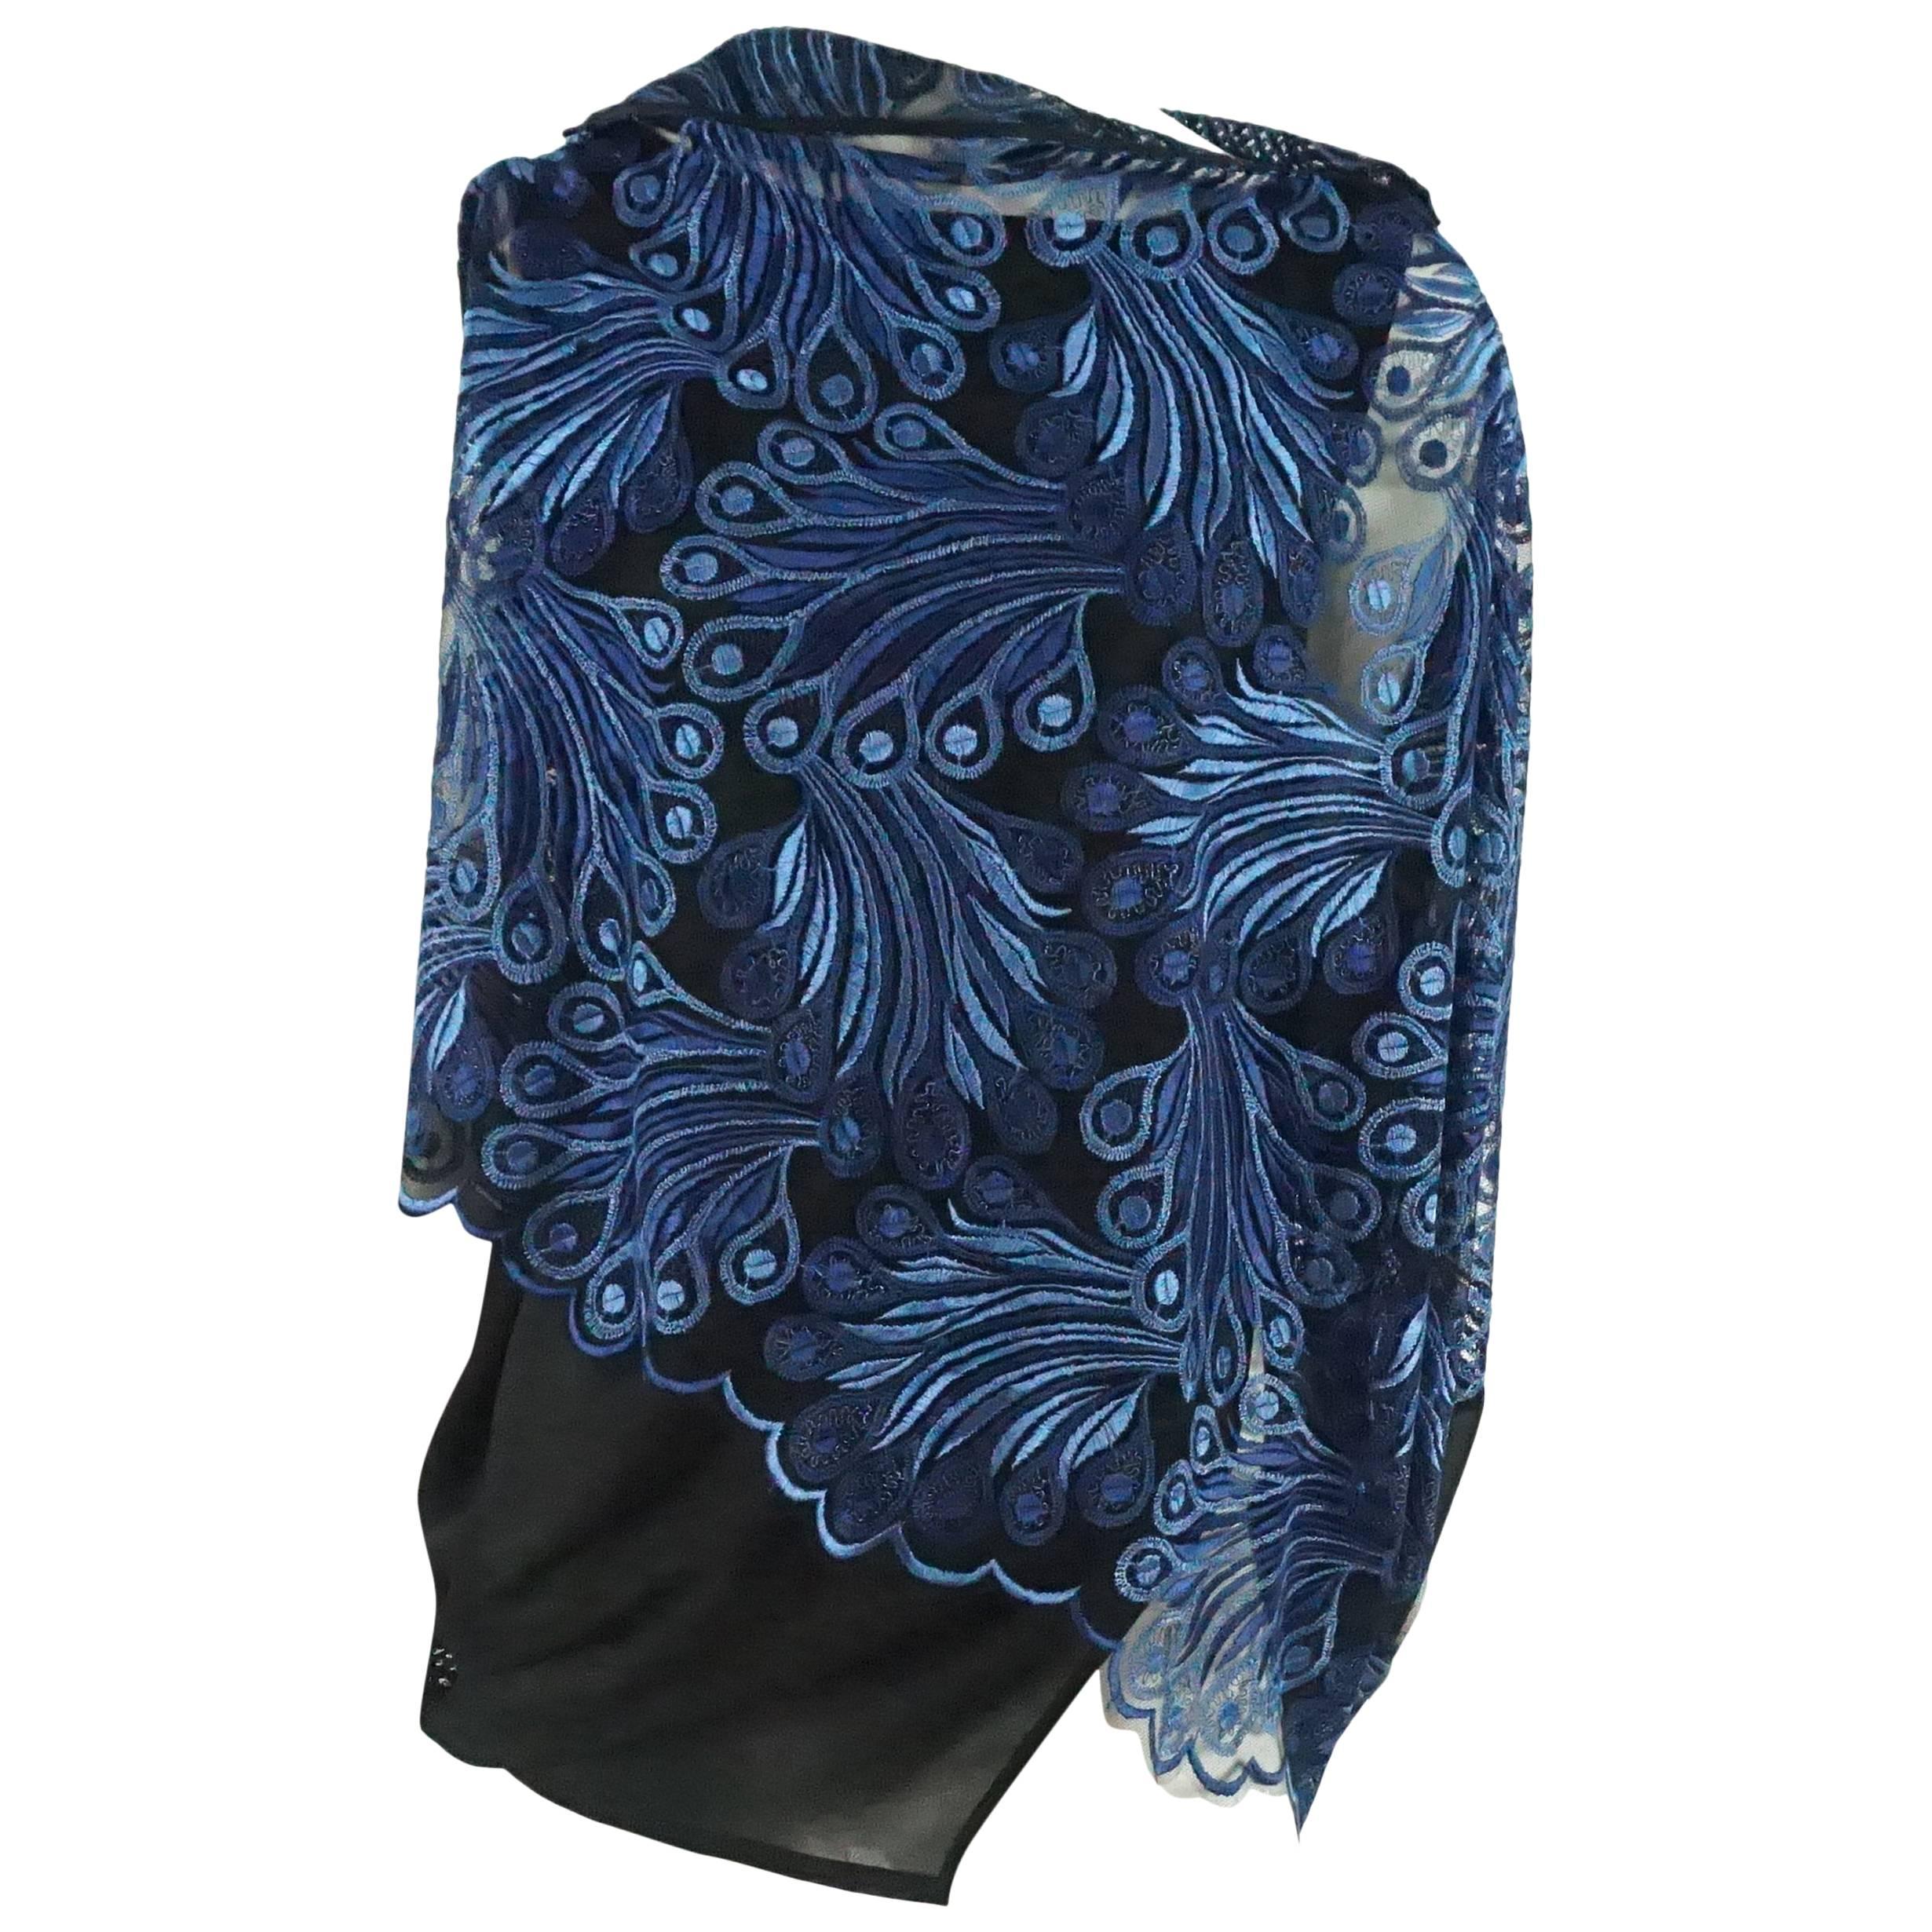 Junya Watanabe Comme des Garcons Blue and Black Lace Top - S For Sale